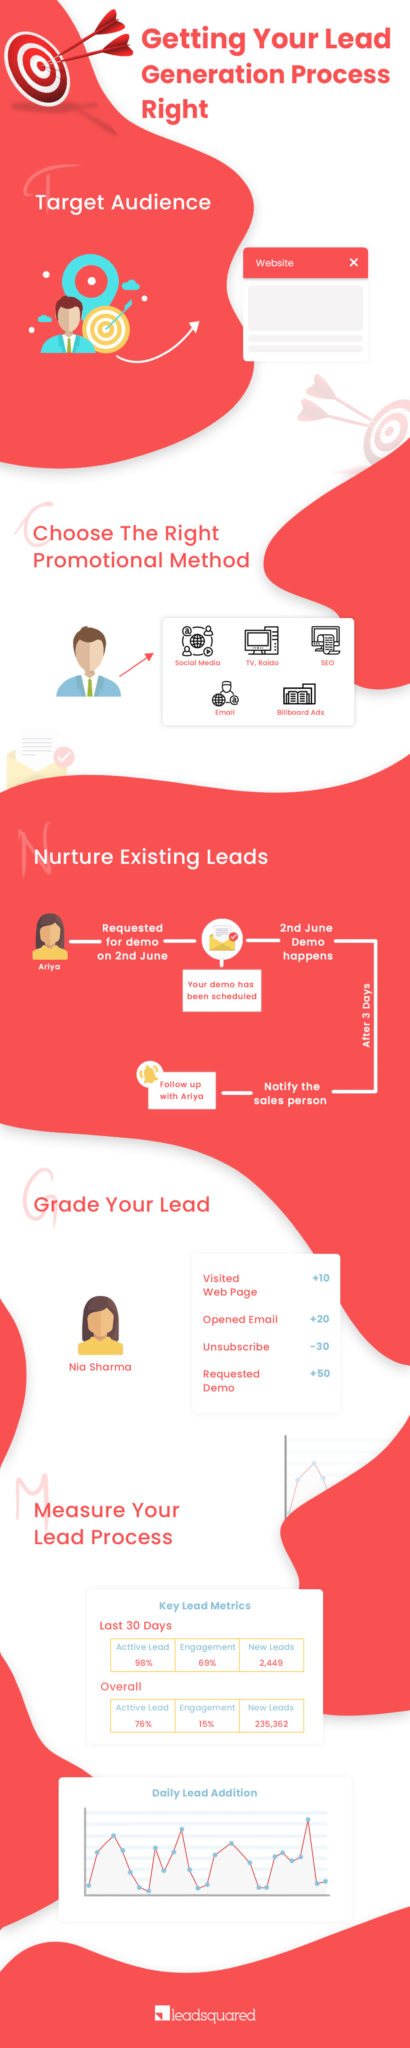 Lead generation process - infographic